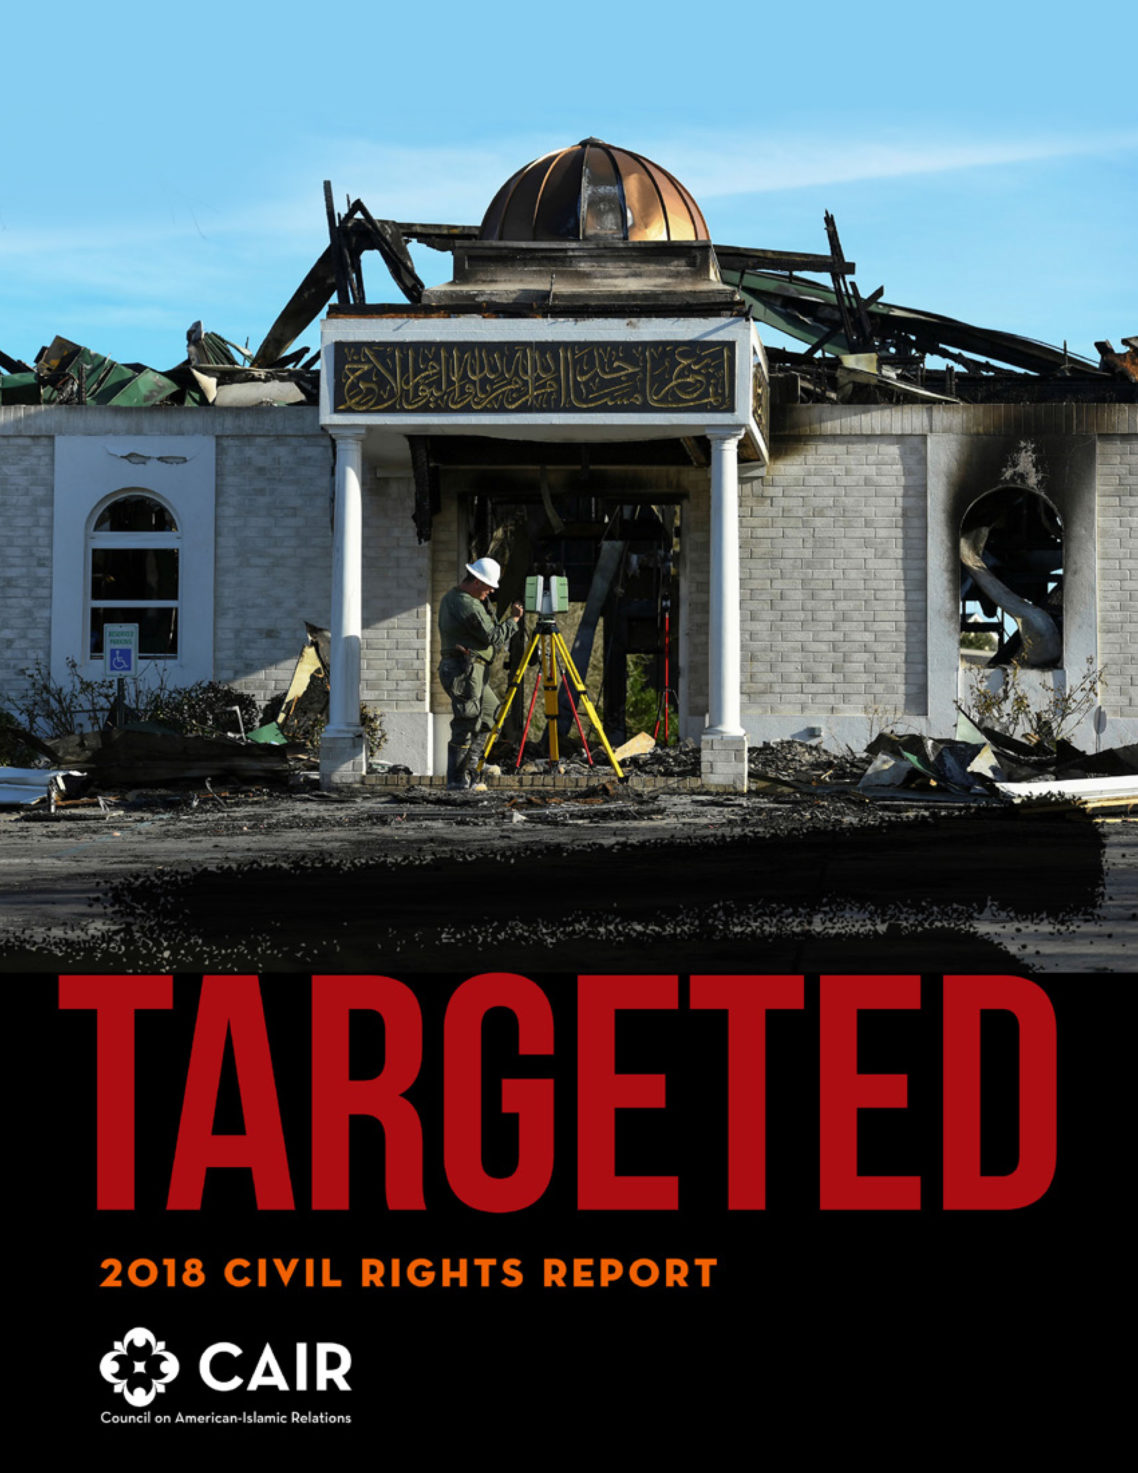 Targeted: 2018 Civil Rights Report